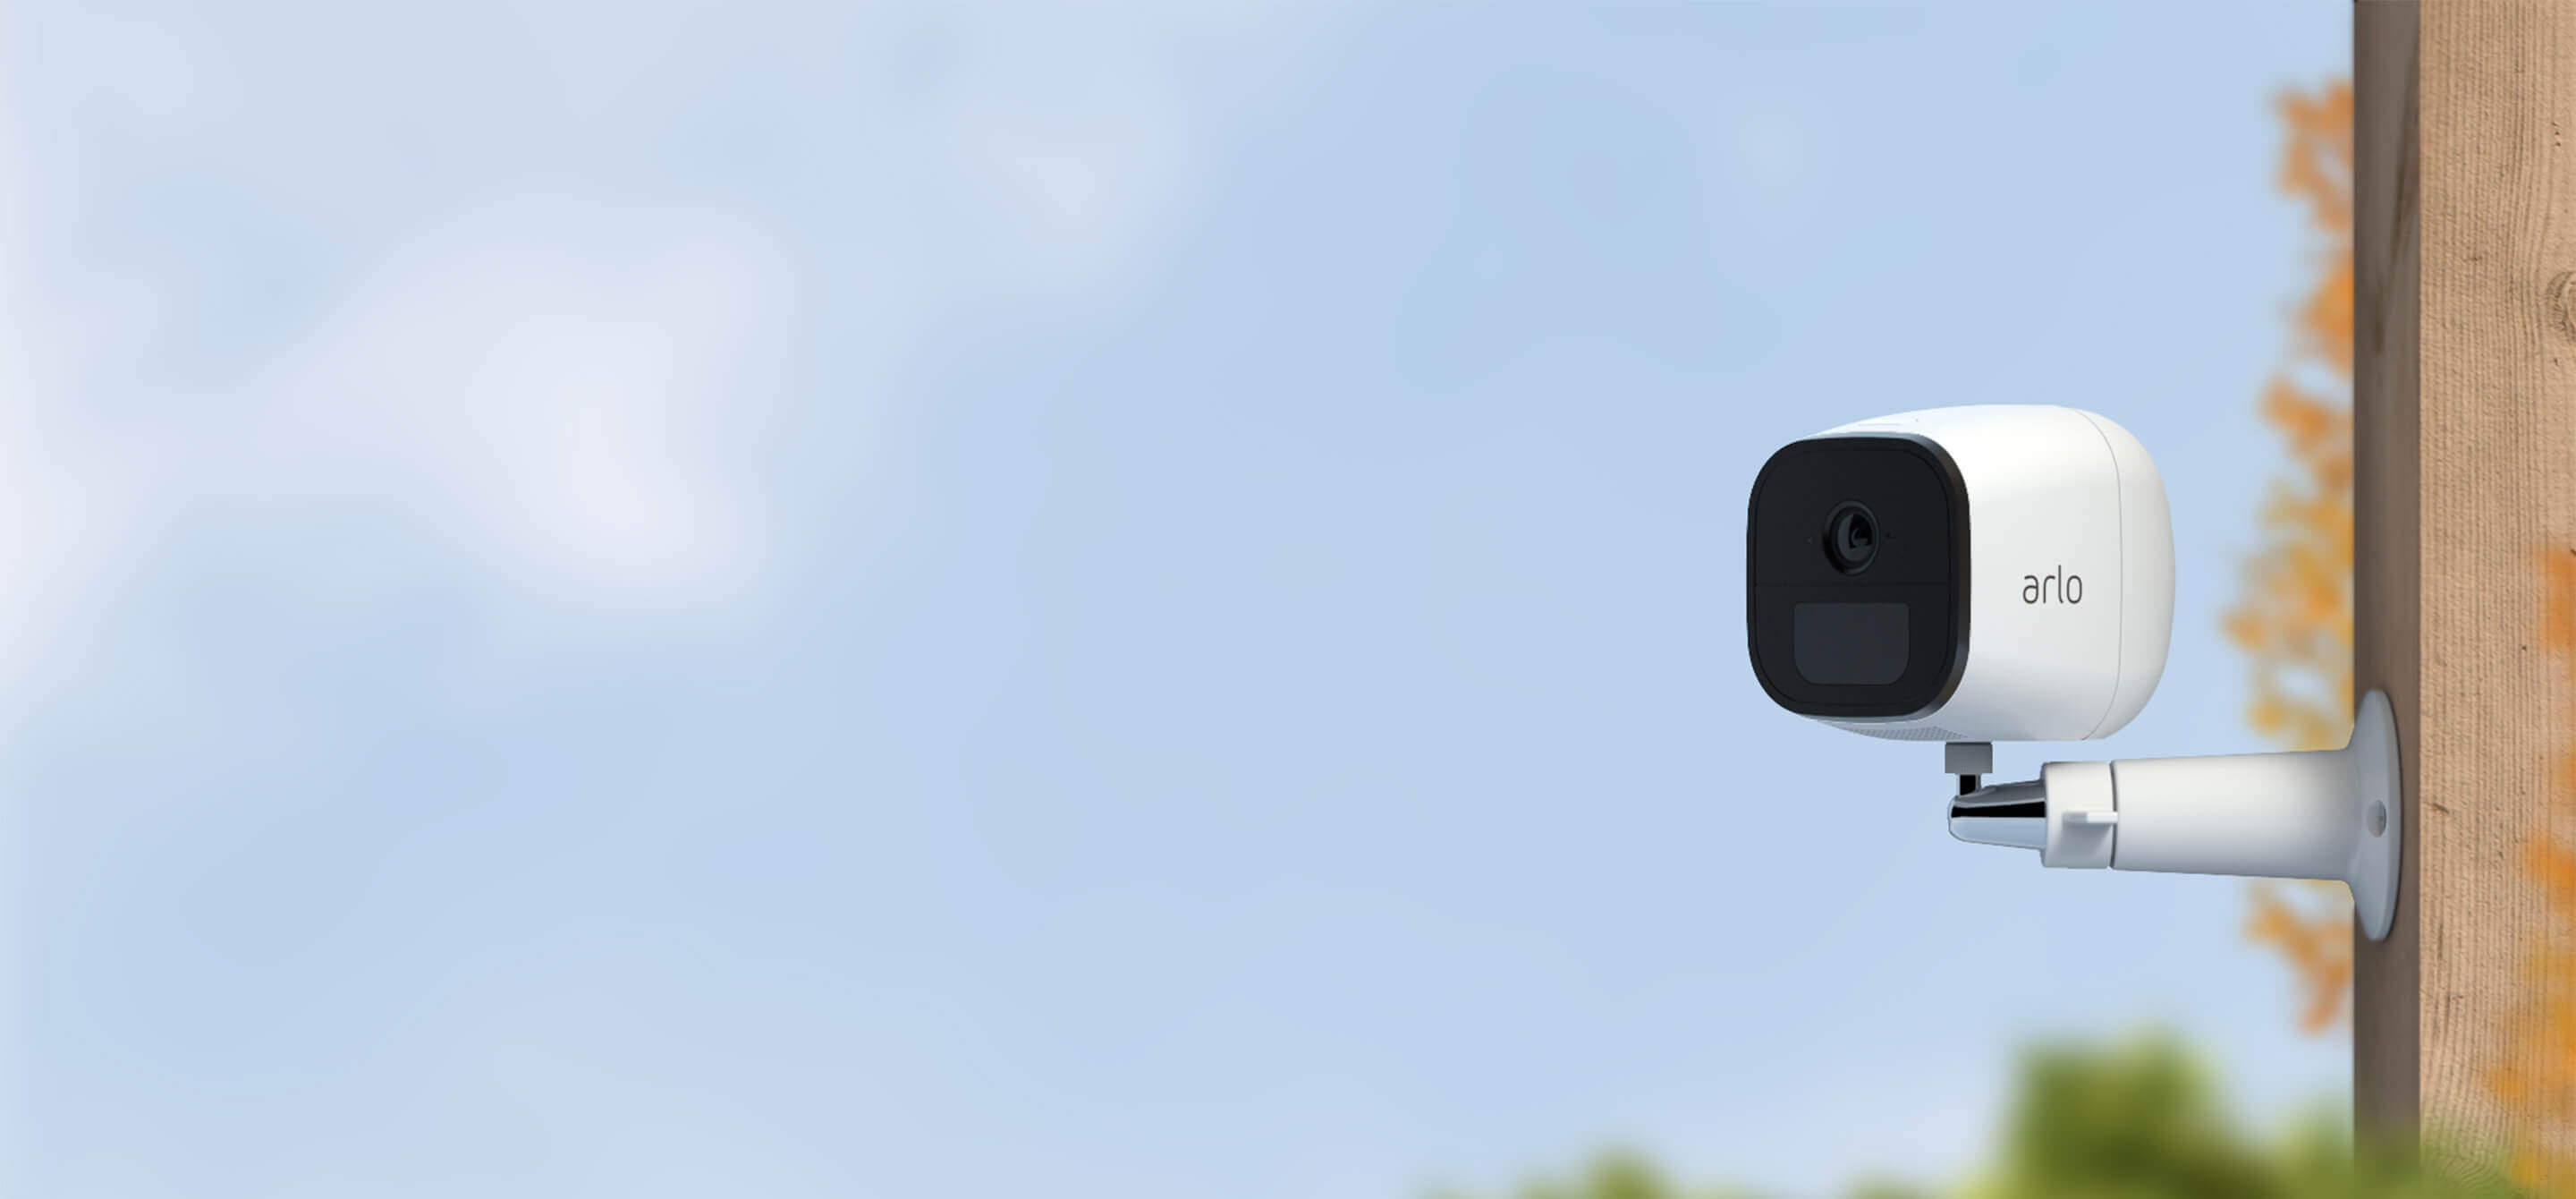 Go anywhere untethered with Arlo mobile cameras